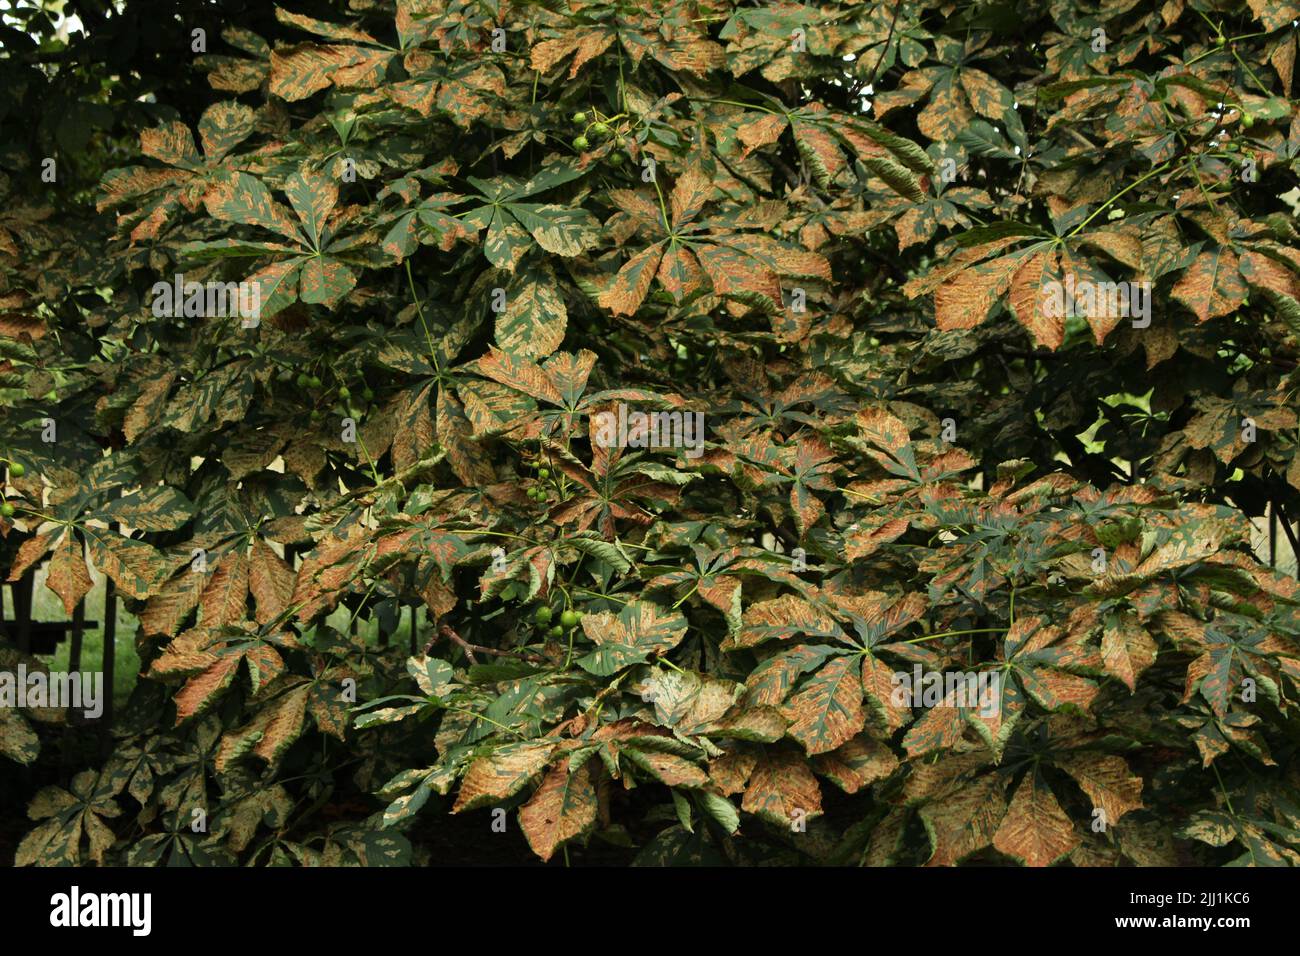 Horse chestnut tree (Aesculus hippocastanum) affected by Leaf-mining moth (Cameraria ohridella) across its foliage Stock Photo